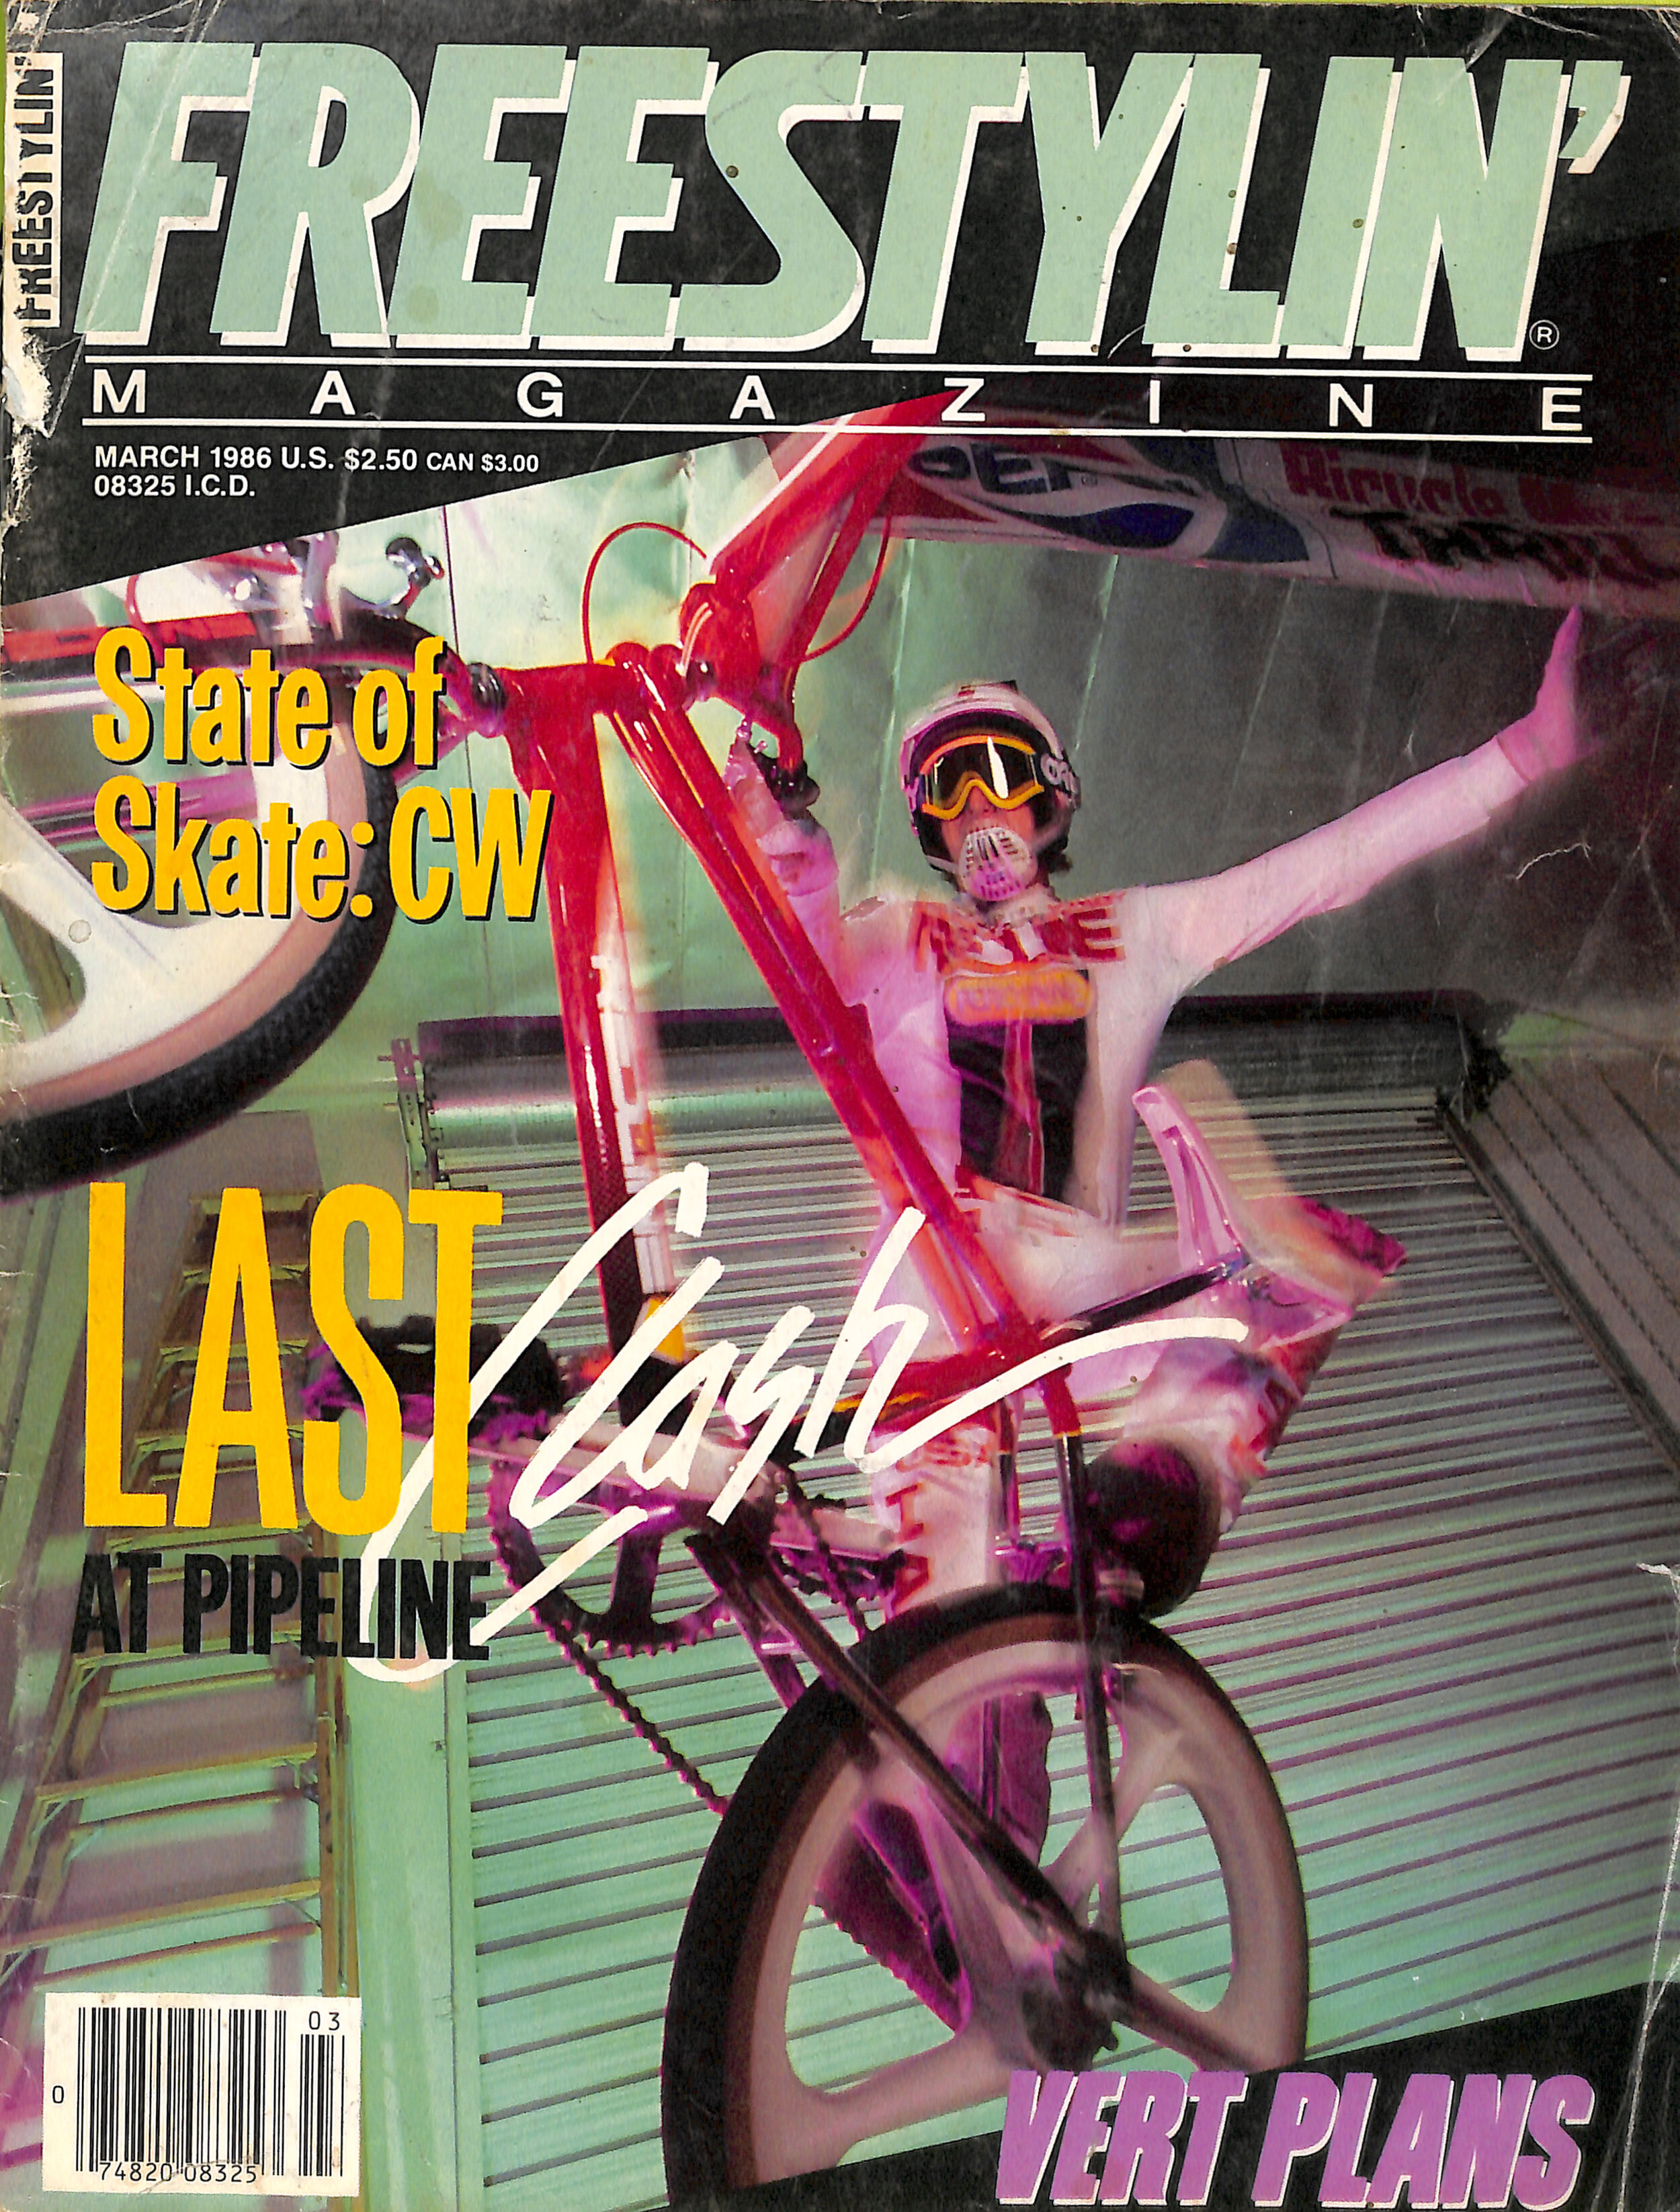 03_1986_March_Freestylin_Cover.jpg